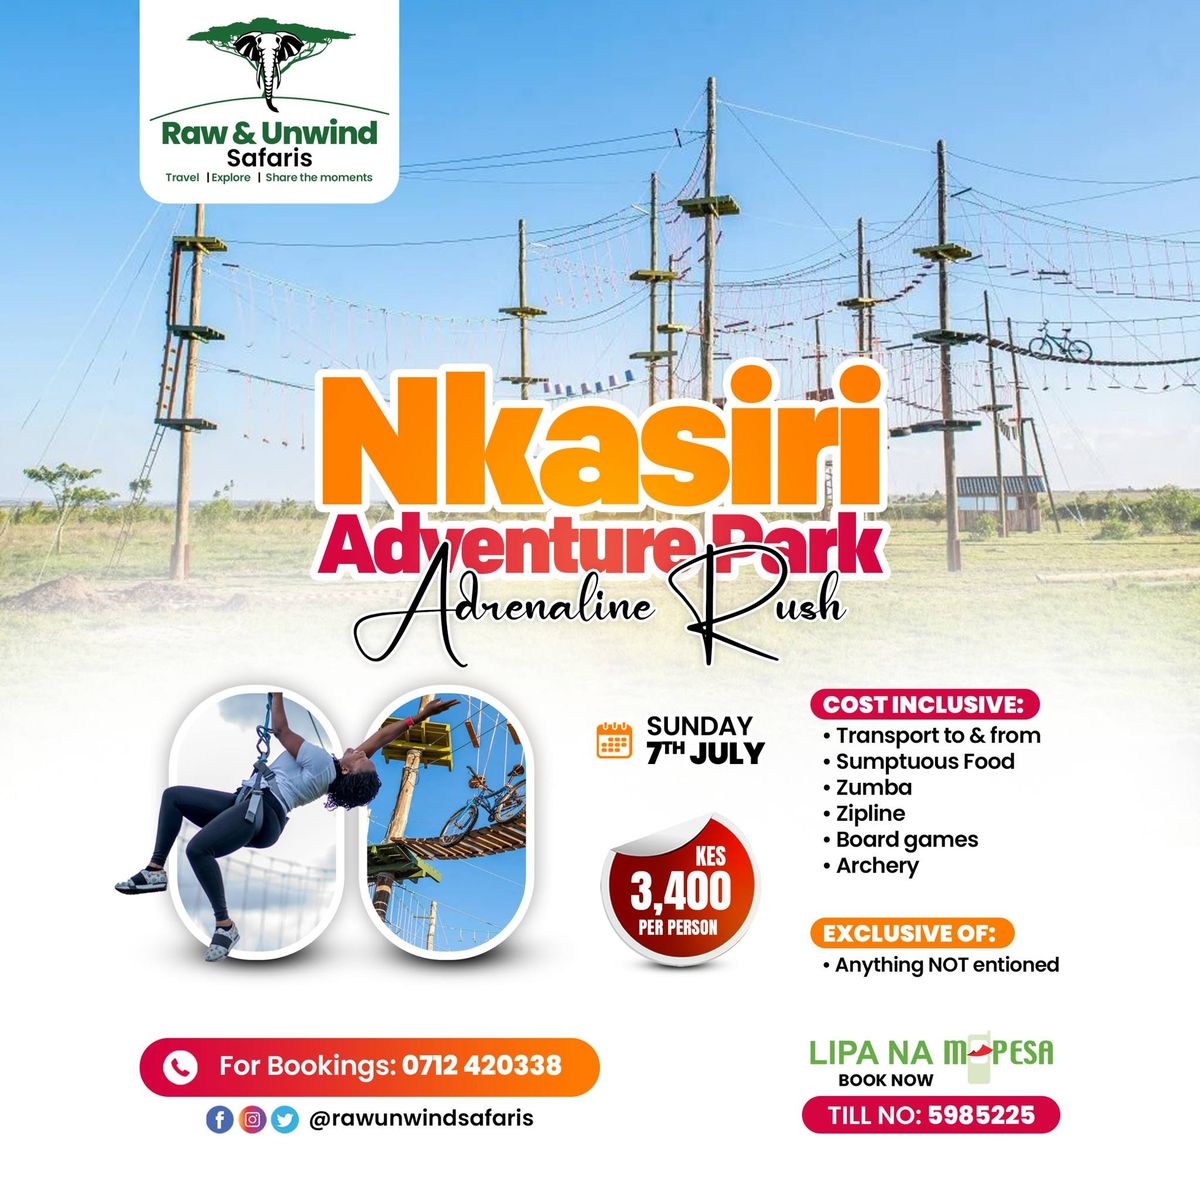 Ready for the Ultimate Adventure? Book Your Nkasiri Adventure Park Tour!